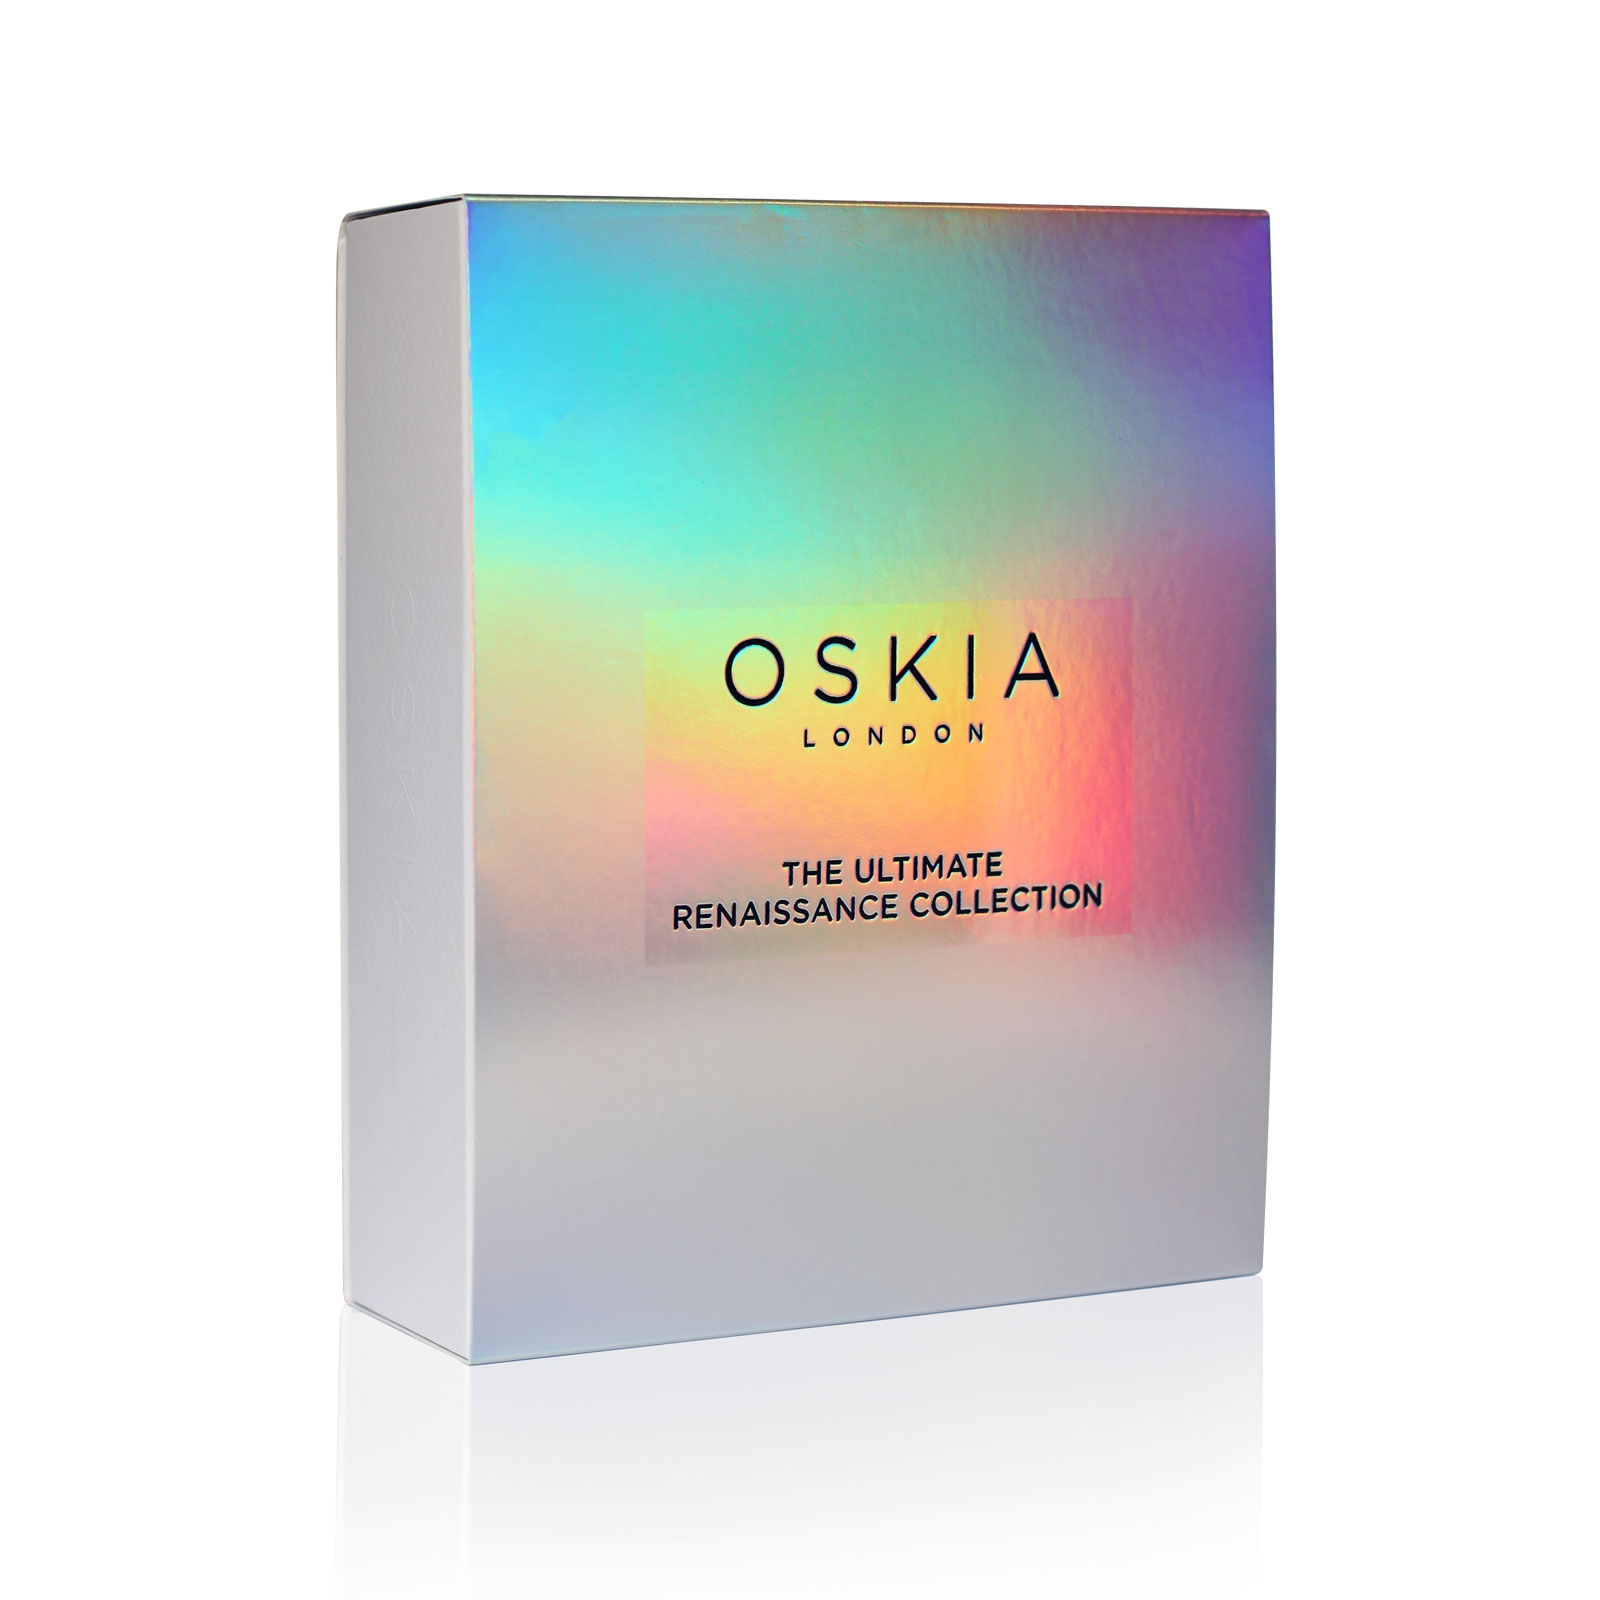 Oskia The Ultimate Renaissance Collection